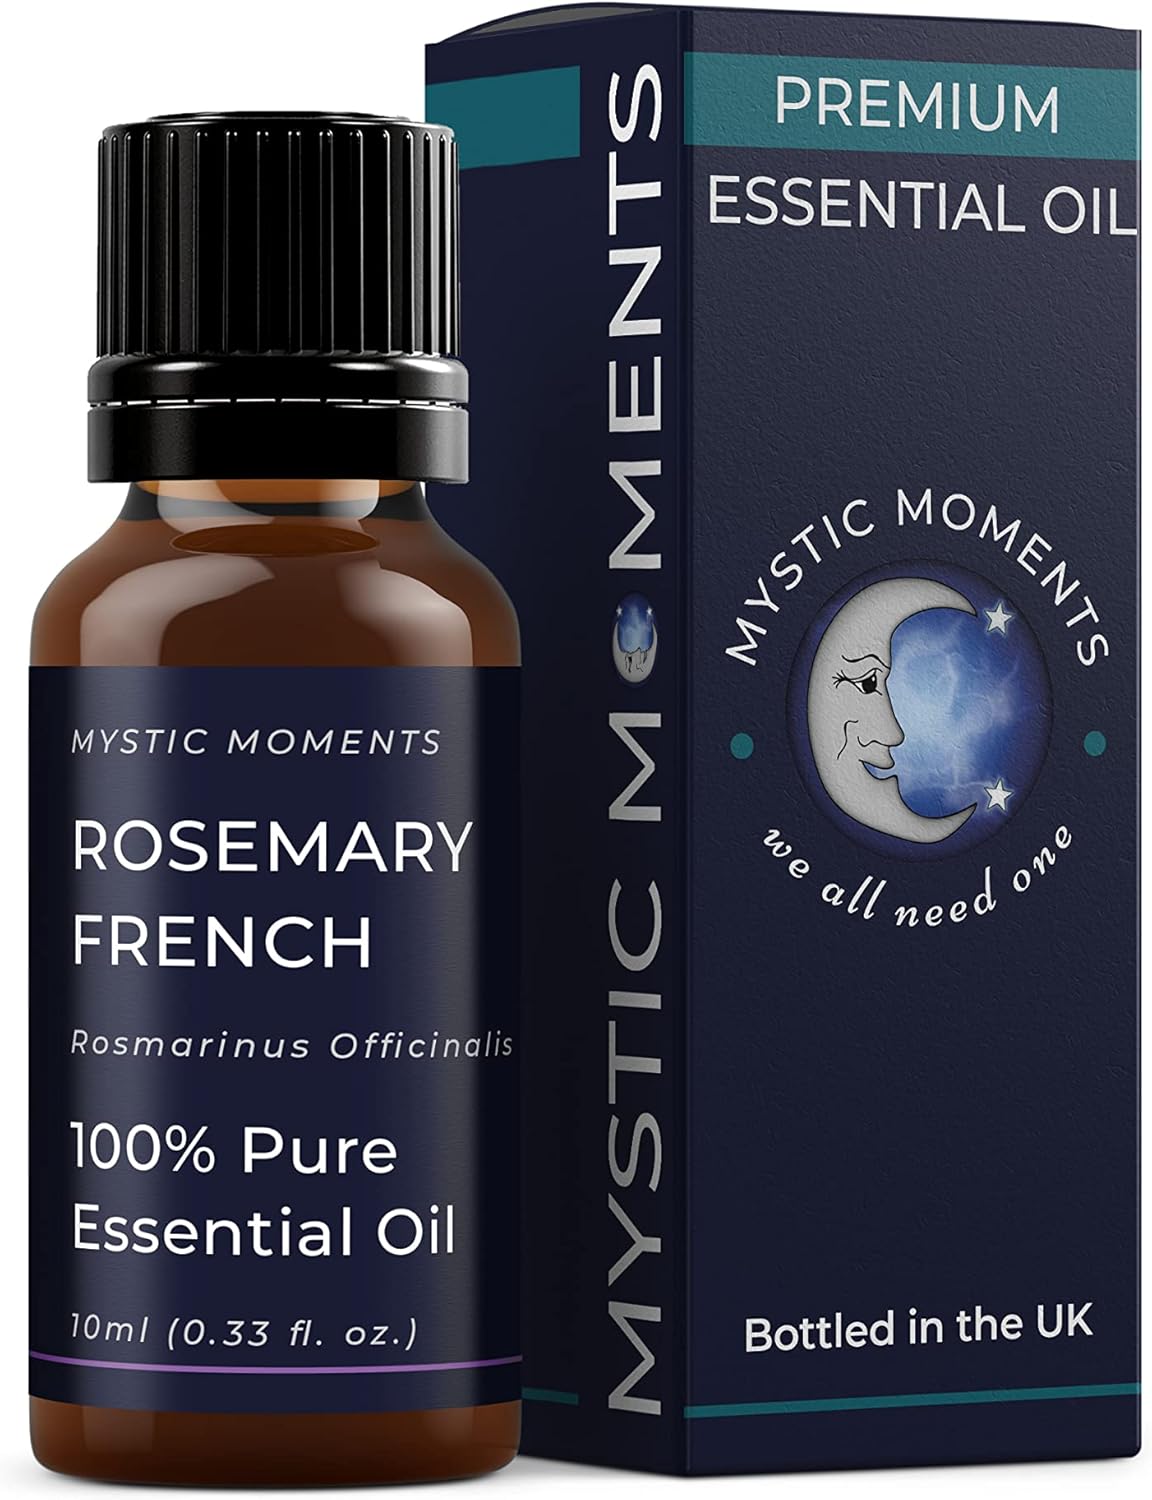 Mystic Moments | Rosemary French Essential Oil 10ml - Pure & Natural oil for Diffusers, Aromatherapy & Massage Blends Vegan GMO Free